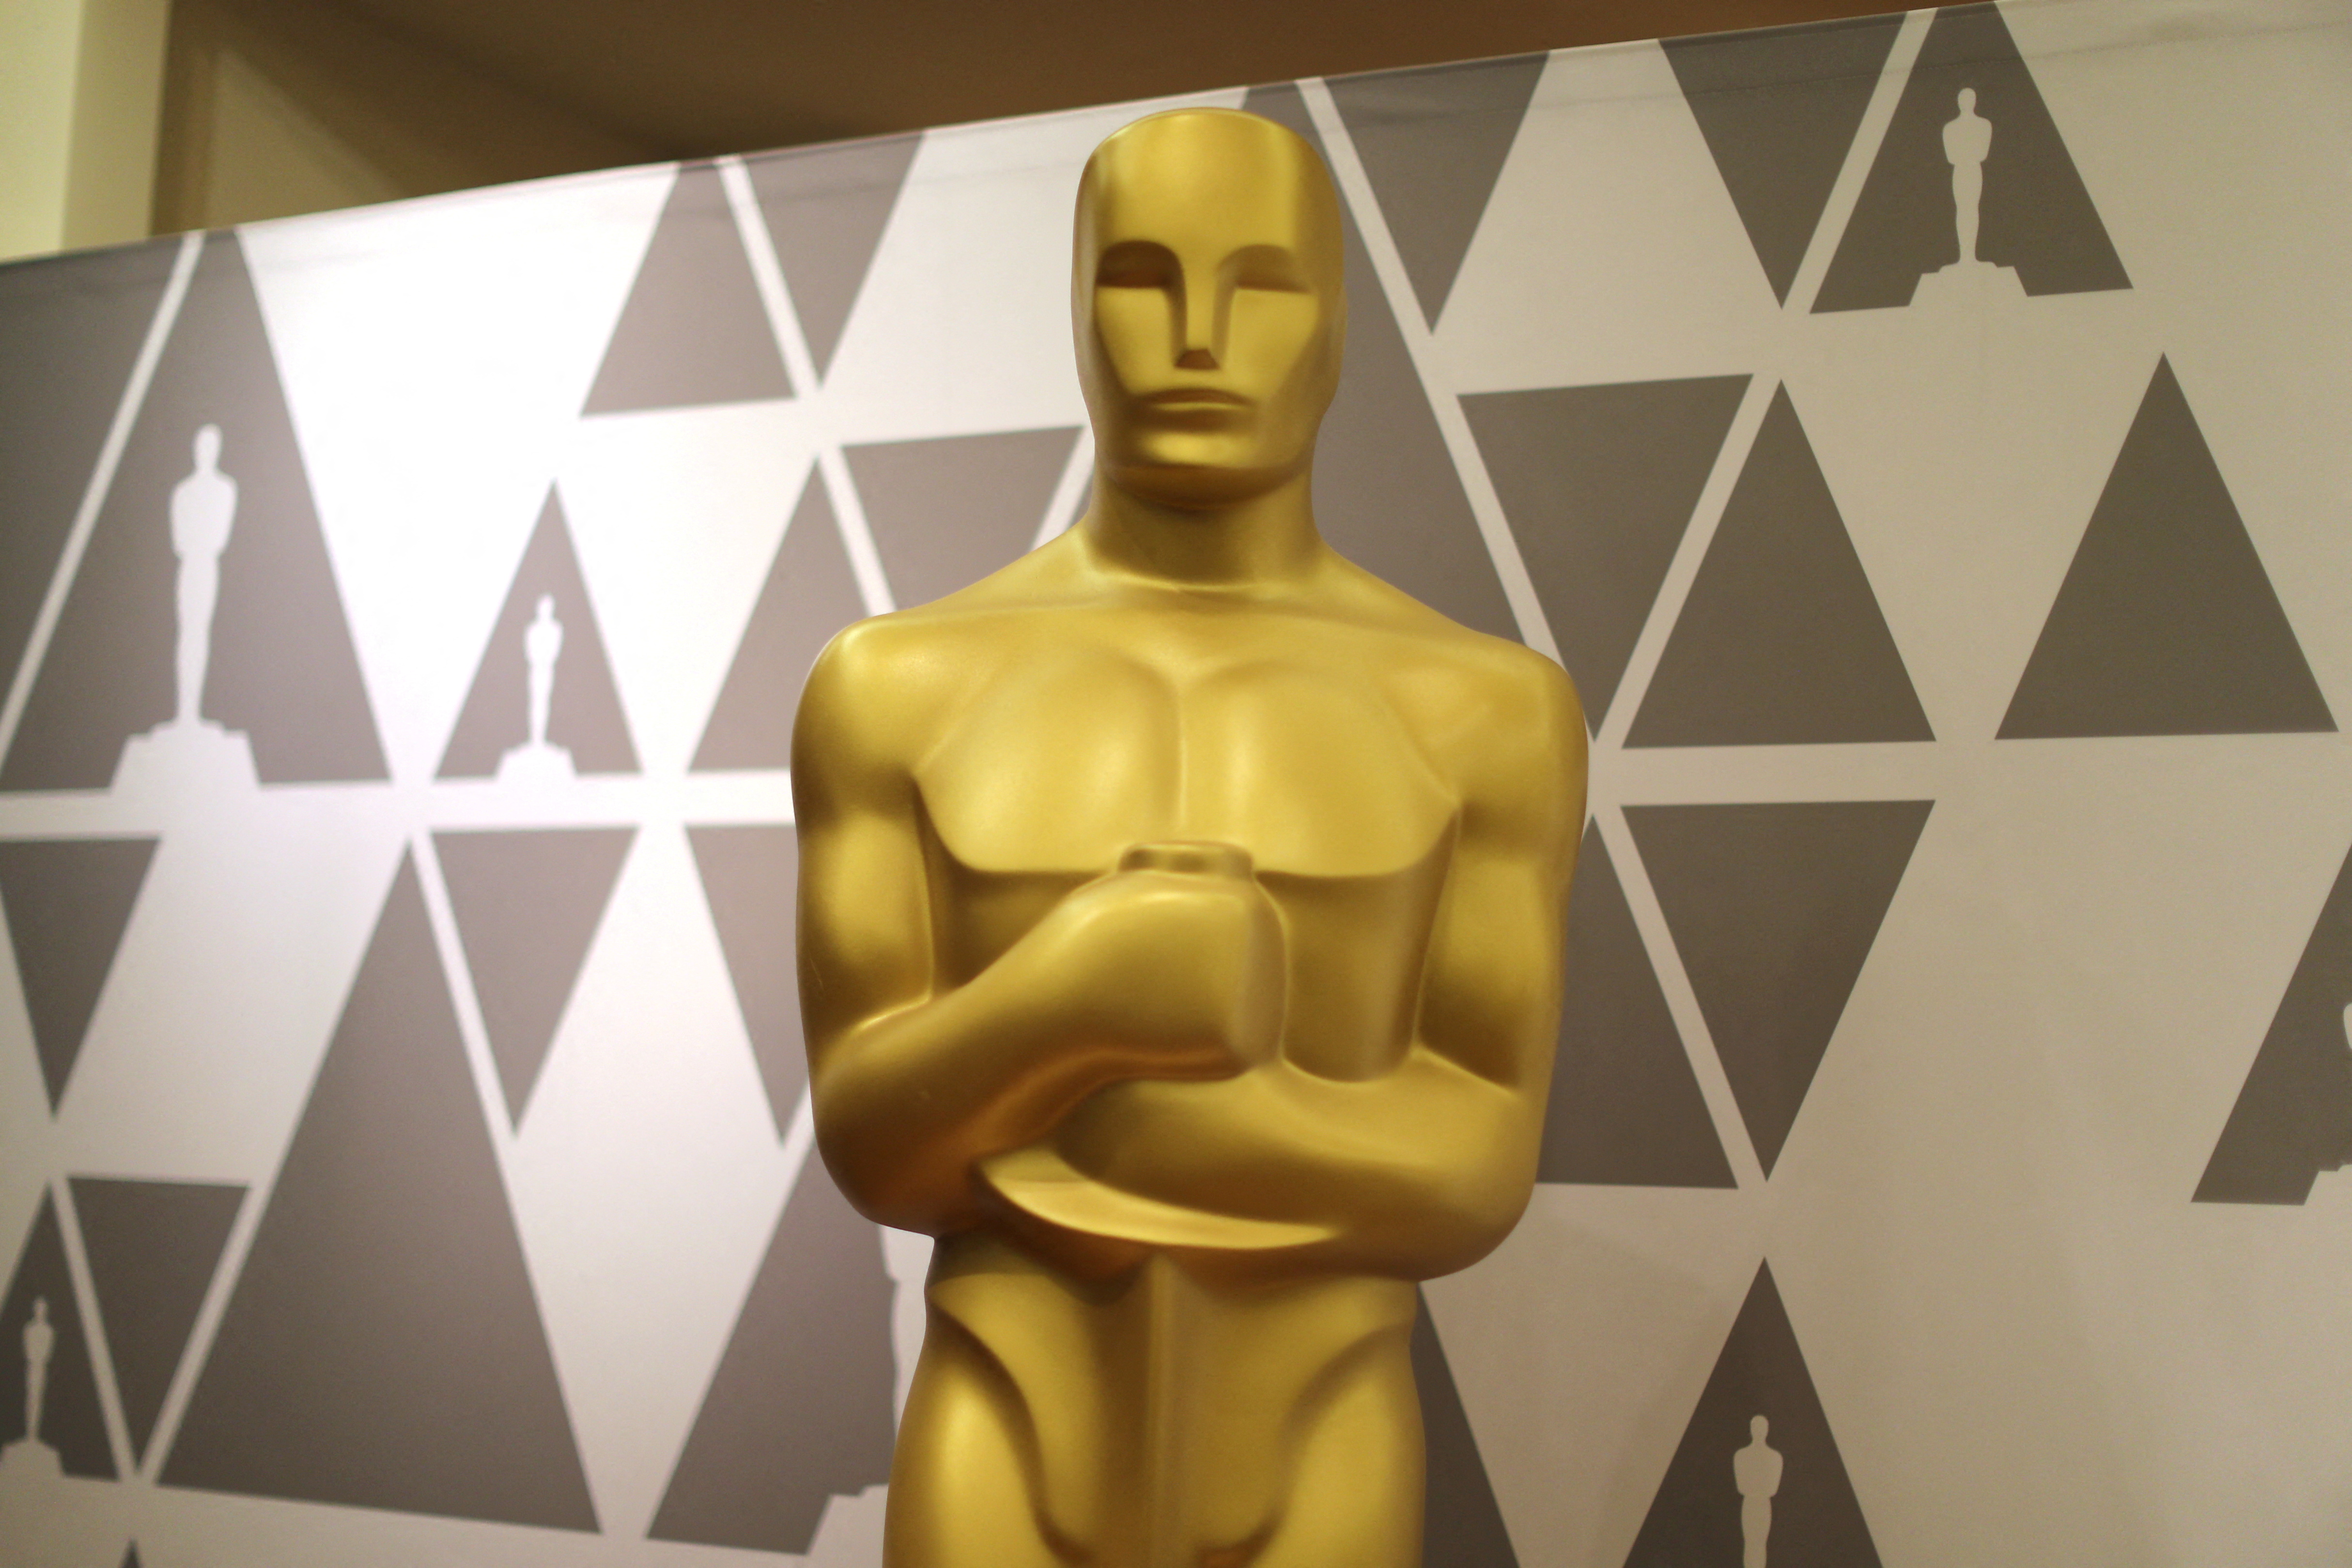 An Oscar statue is seen in a souvenir shop at the Dolby Theatre during preparations for the Oscars in Hollywood, Los Angeles